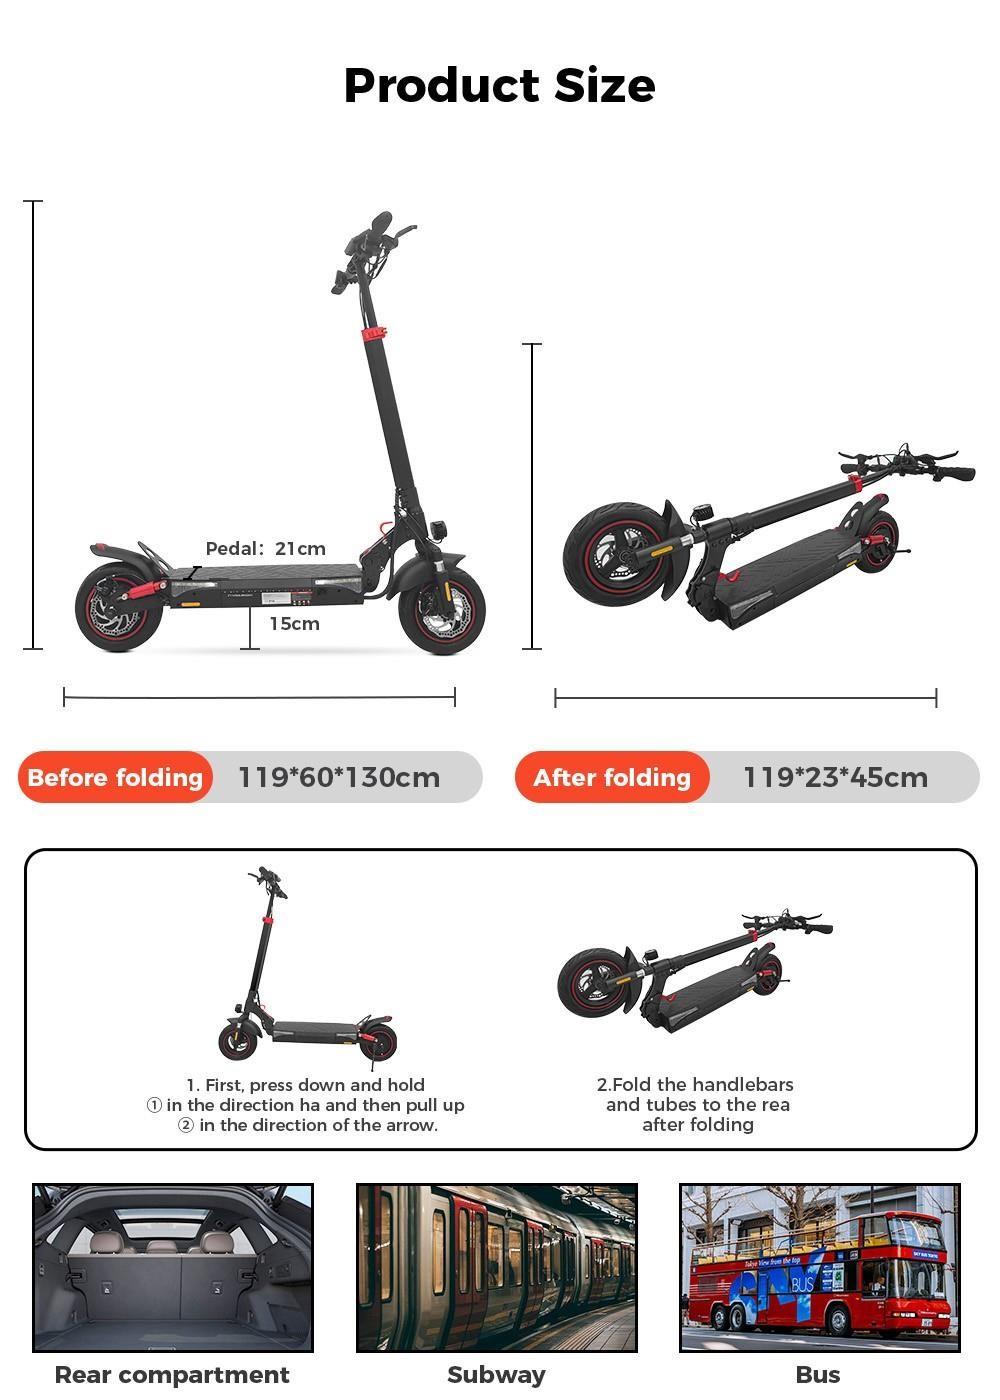 iScooter T4 Electric Scooter, 10in Honeycomb Tire, 600W Motor, 40km/h Max Speed, 48V 13Ah Battery